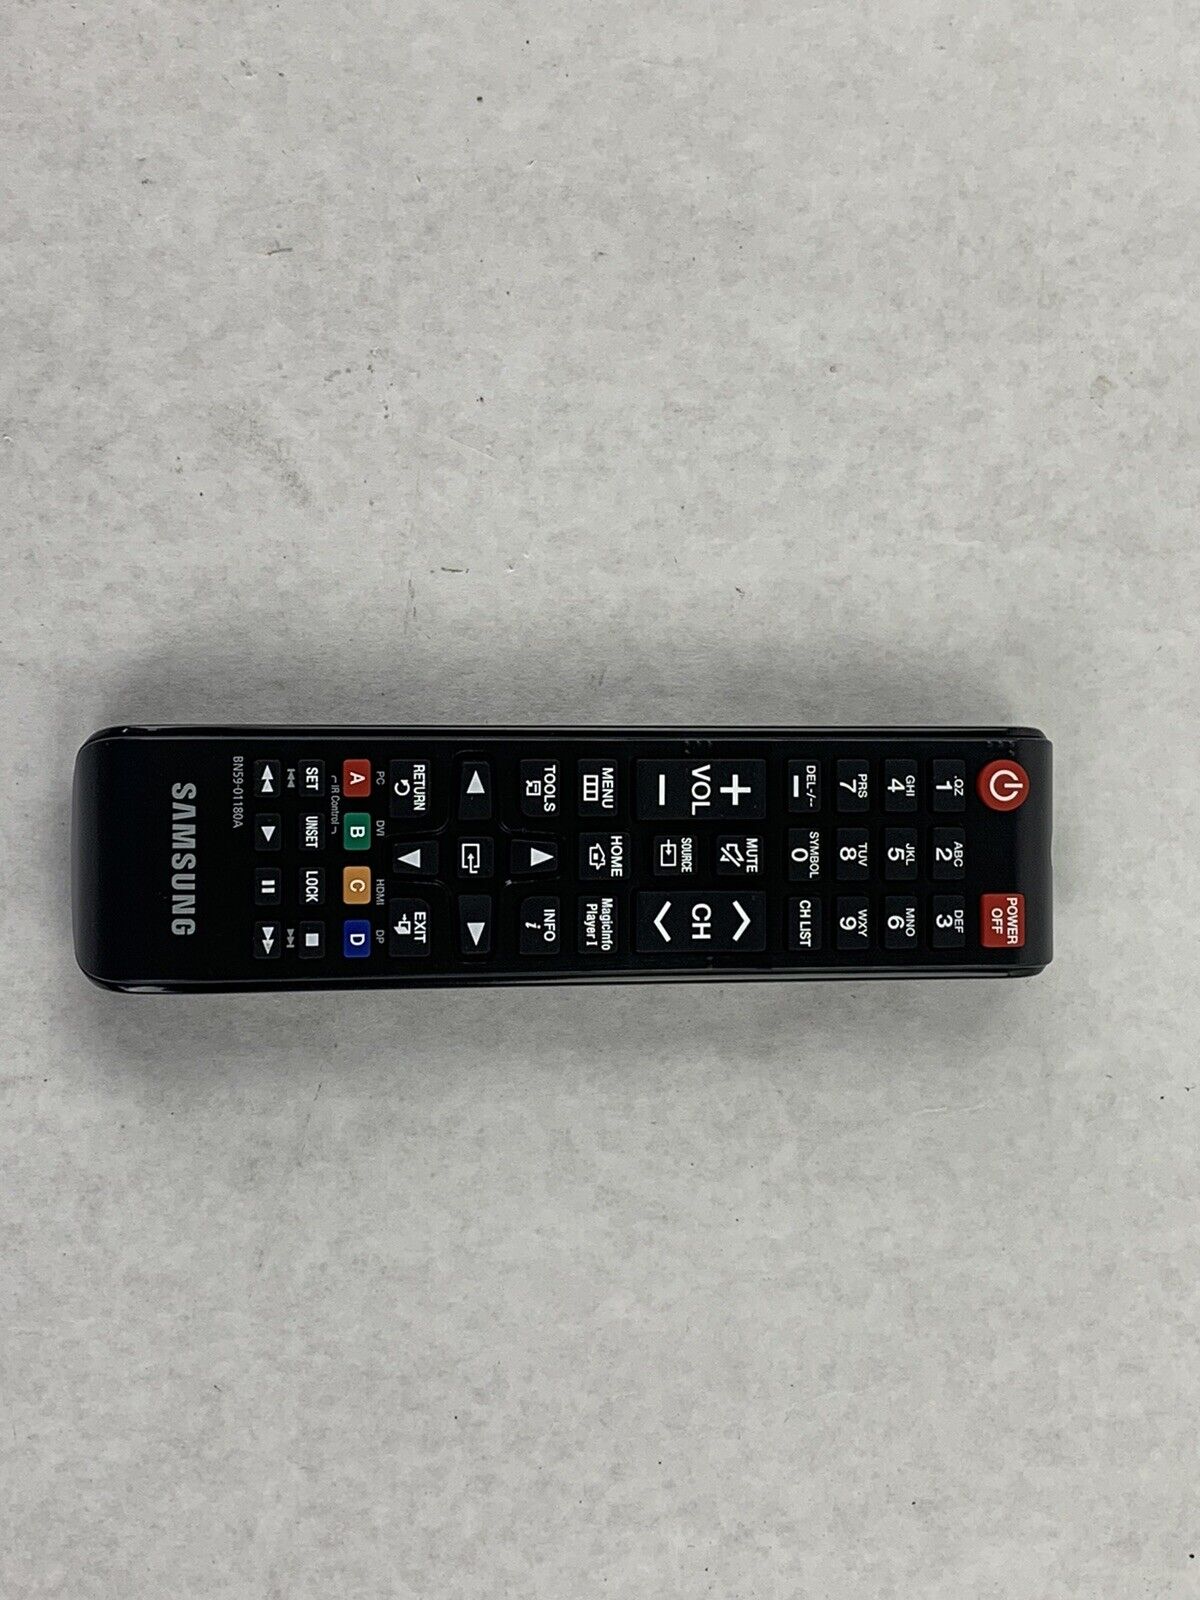 Genuine Samsung AA59-00817A AA5900817A TV Remote Control with 3D Smart Remote